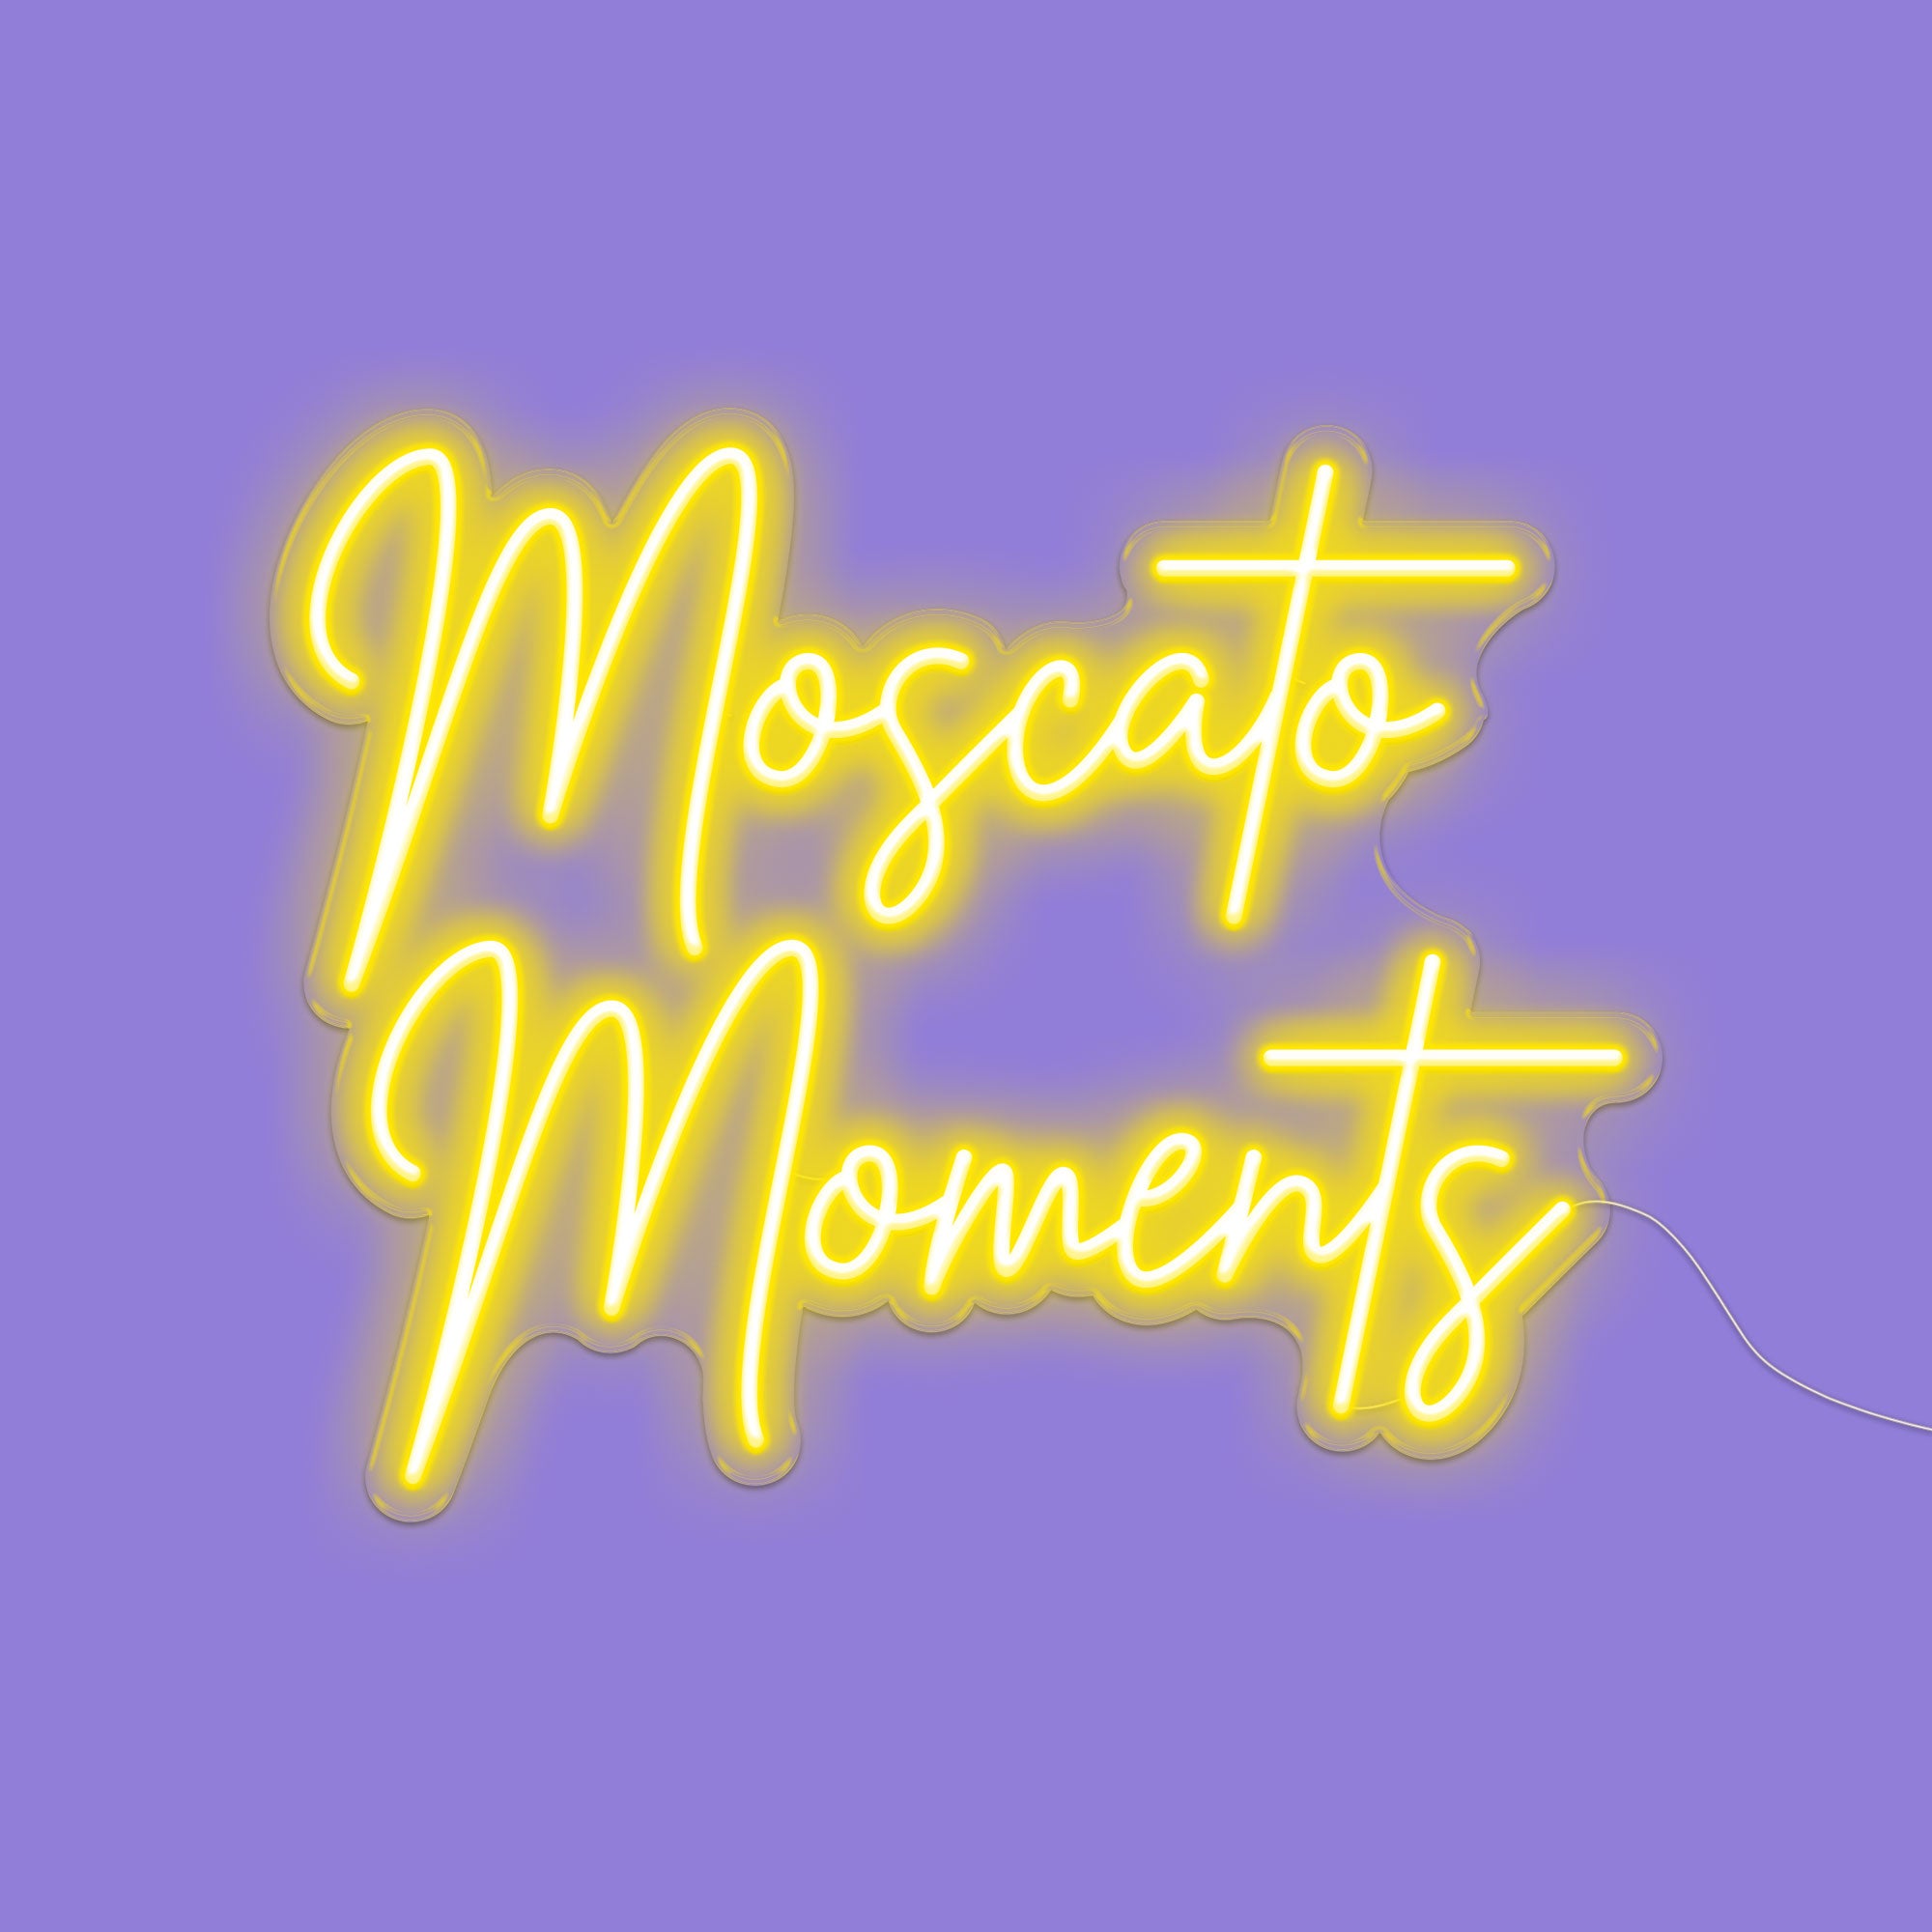 Moscato Moments Neon Sign